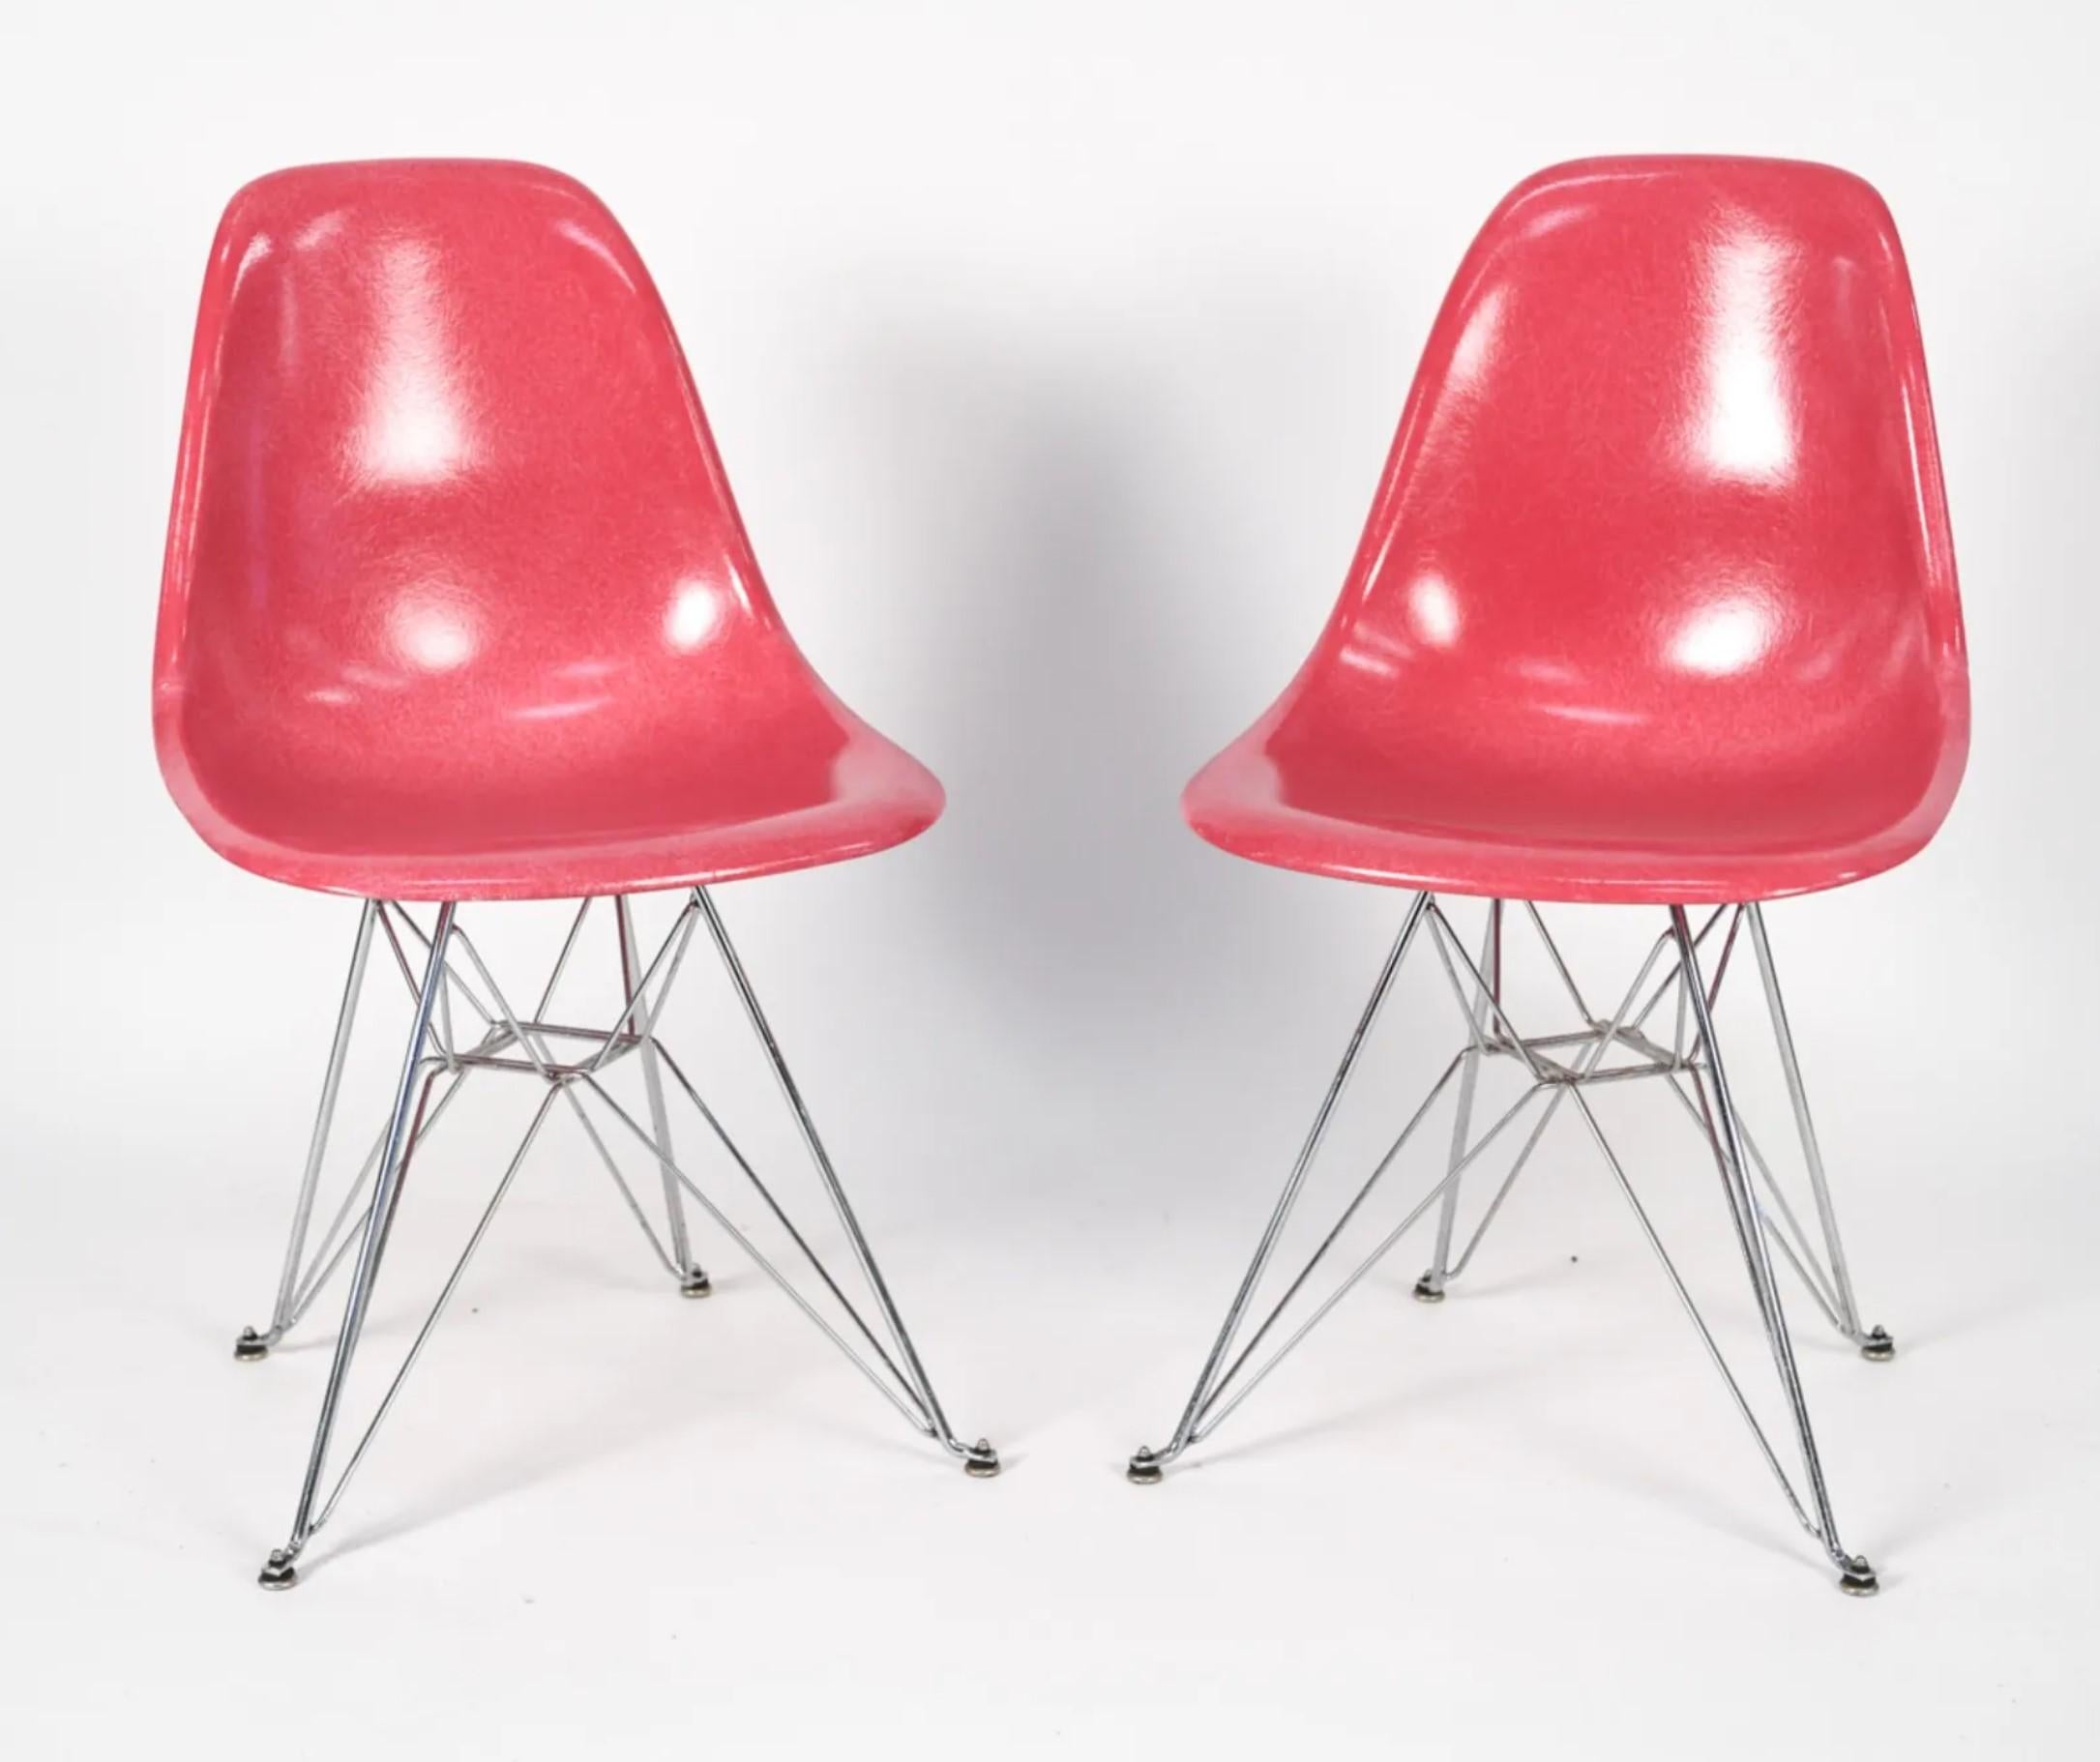 The fiberglass shell chair is easily one of the most important and recognizable designs of the twentieth century. They were originally designed in 1948, as an entry in The Museum of Modern Art’s International Design Competition. At the time, no one